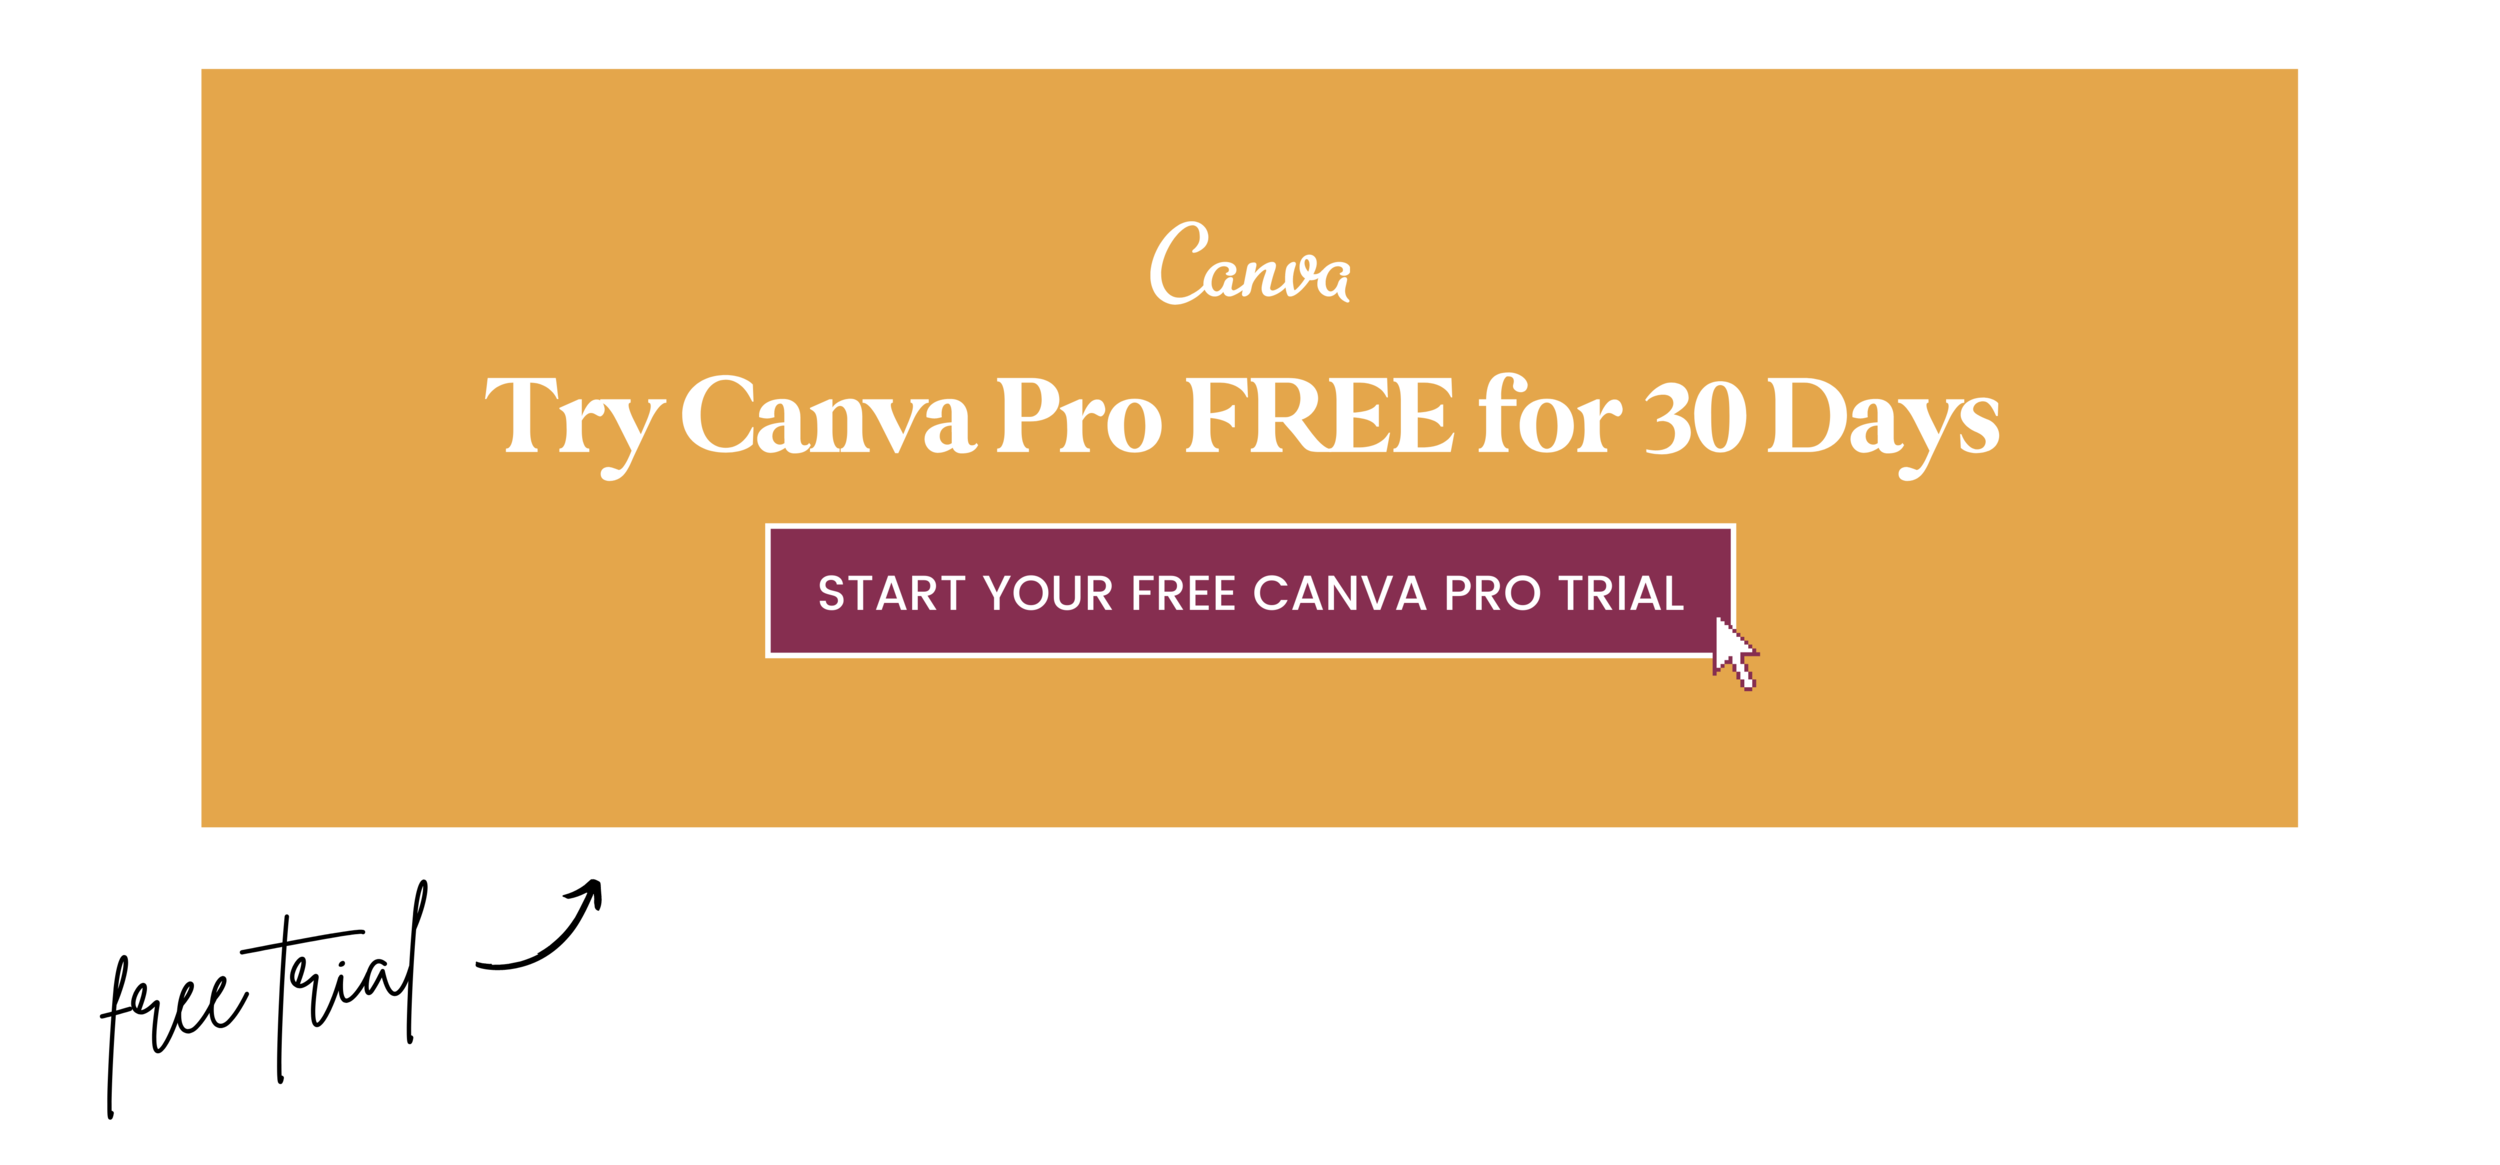 How to Search for Canva Stock Photos using Brand Codes | FallonTravels.com